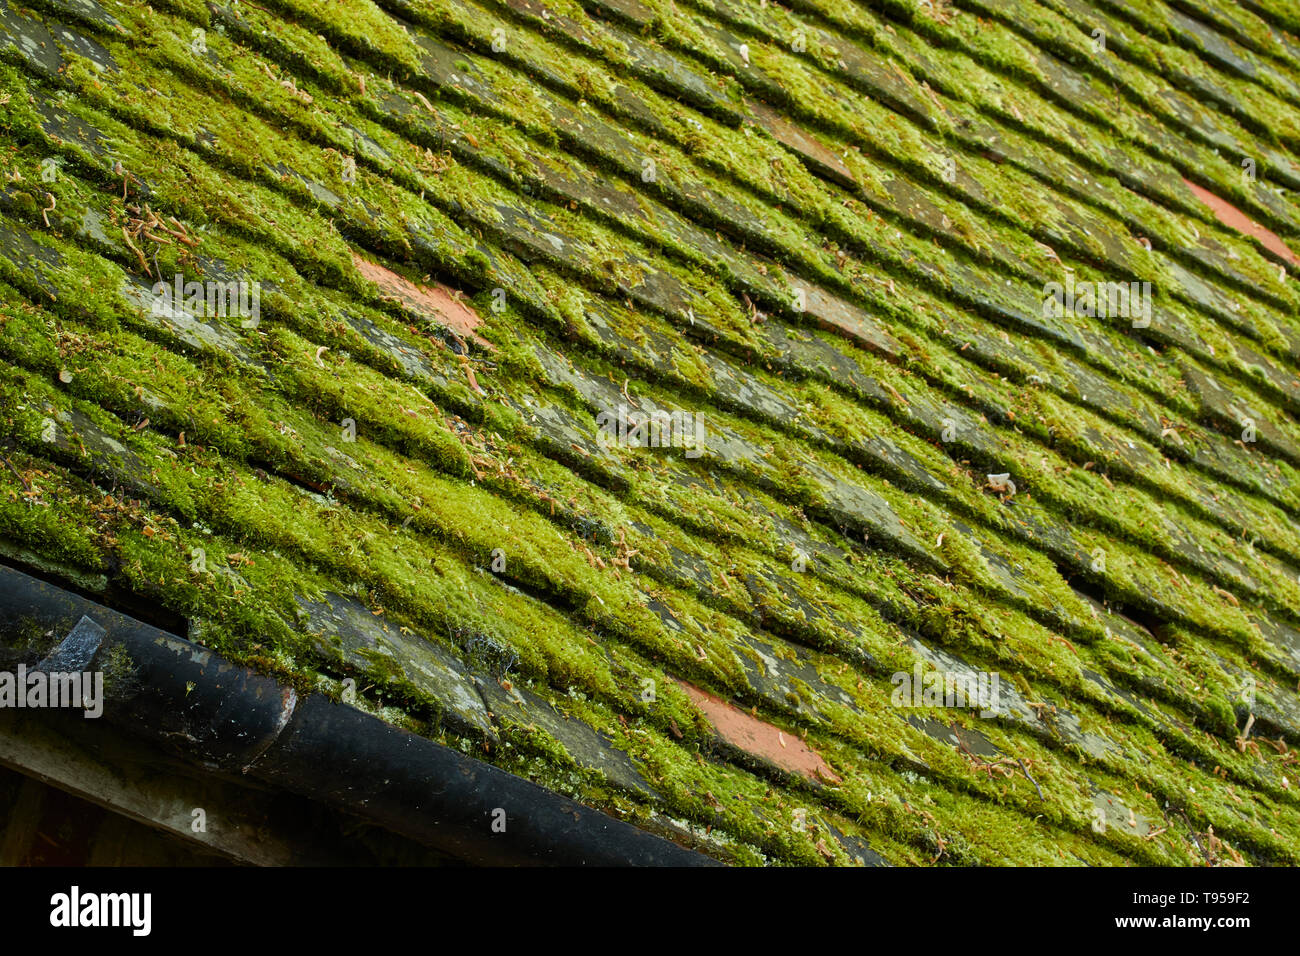 Abstract of roof covered in algae patterned tiles Stock Photo